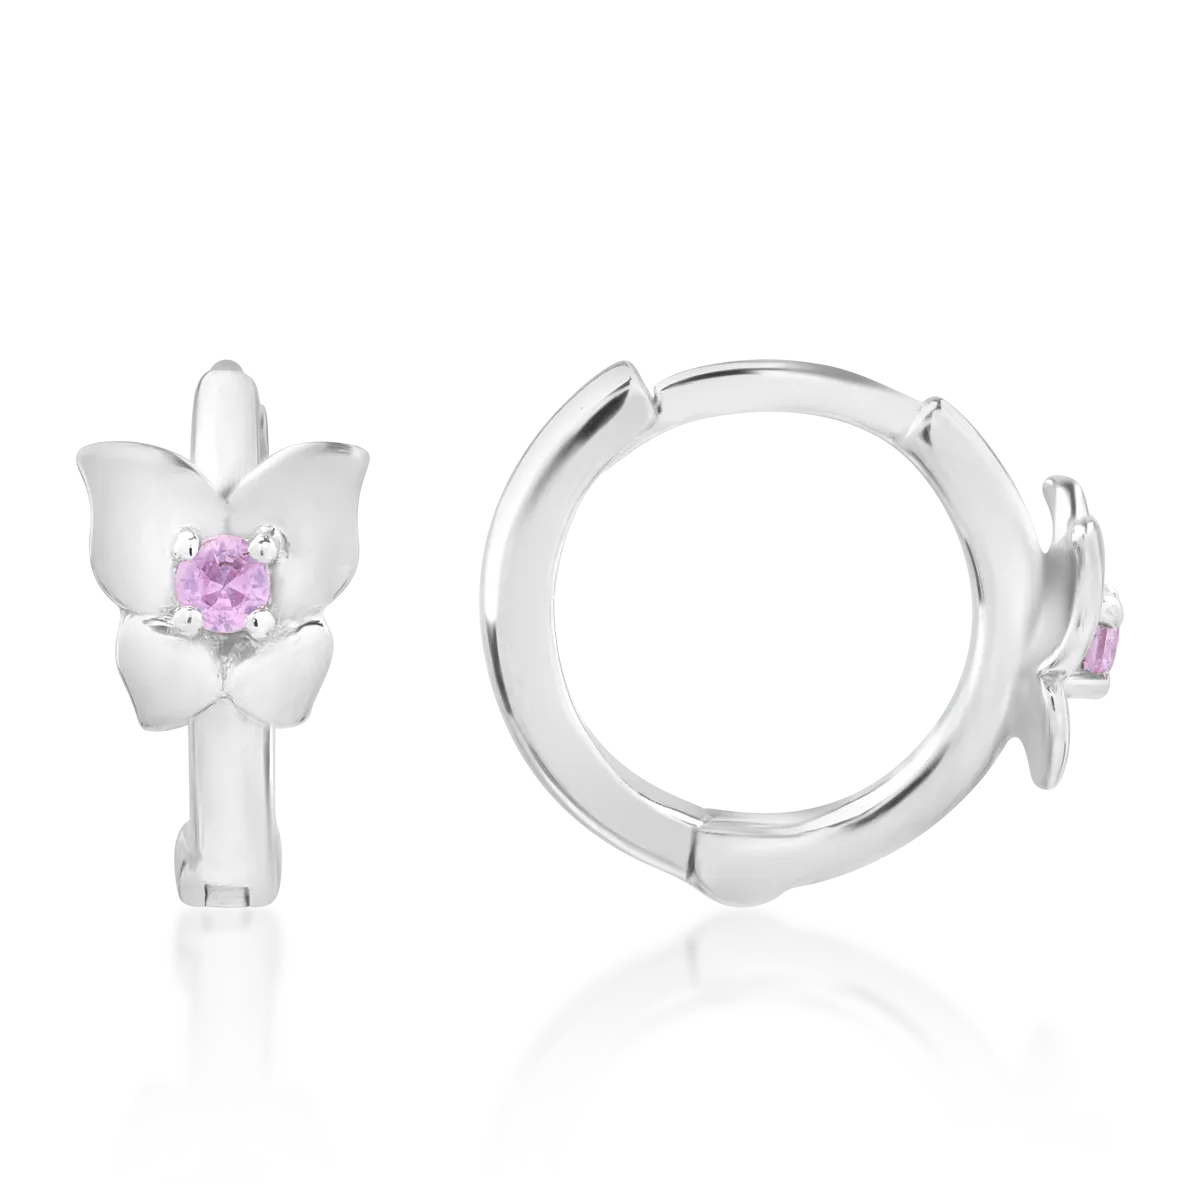 14K white gold children's earrings with 0.087ct pink sapphires